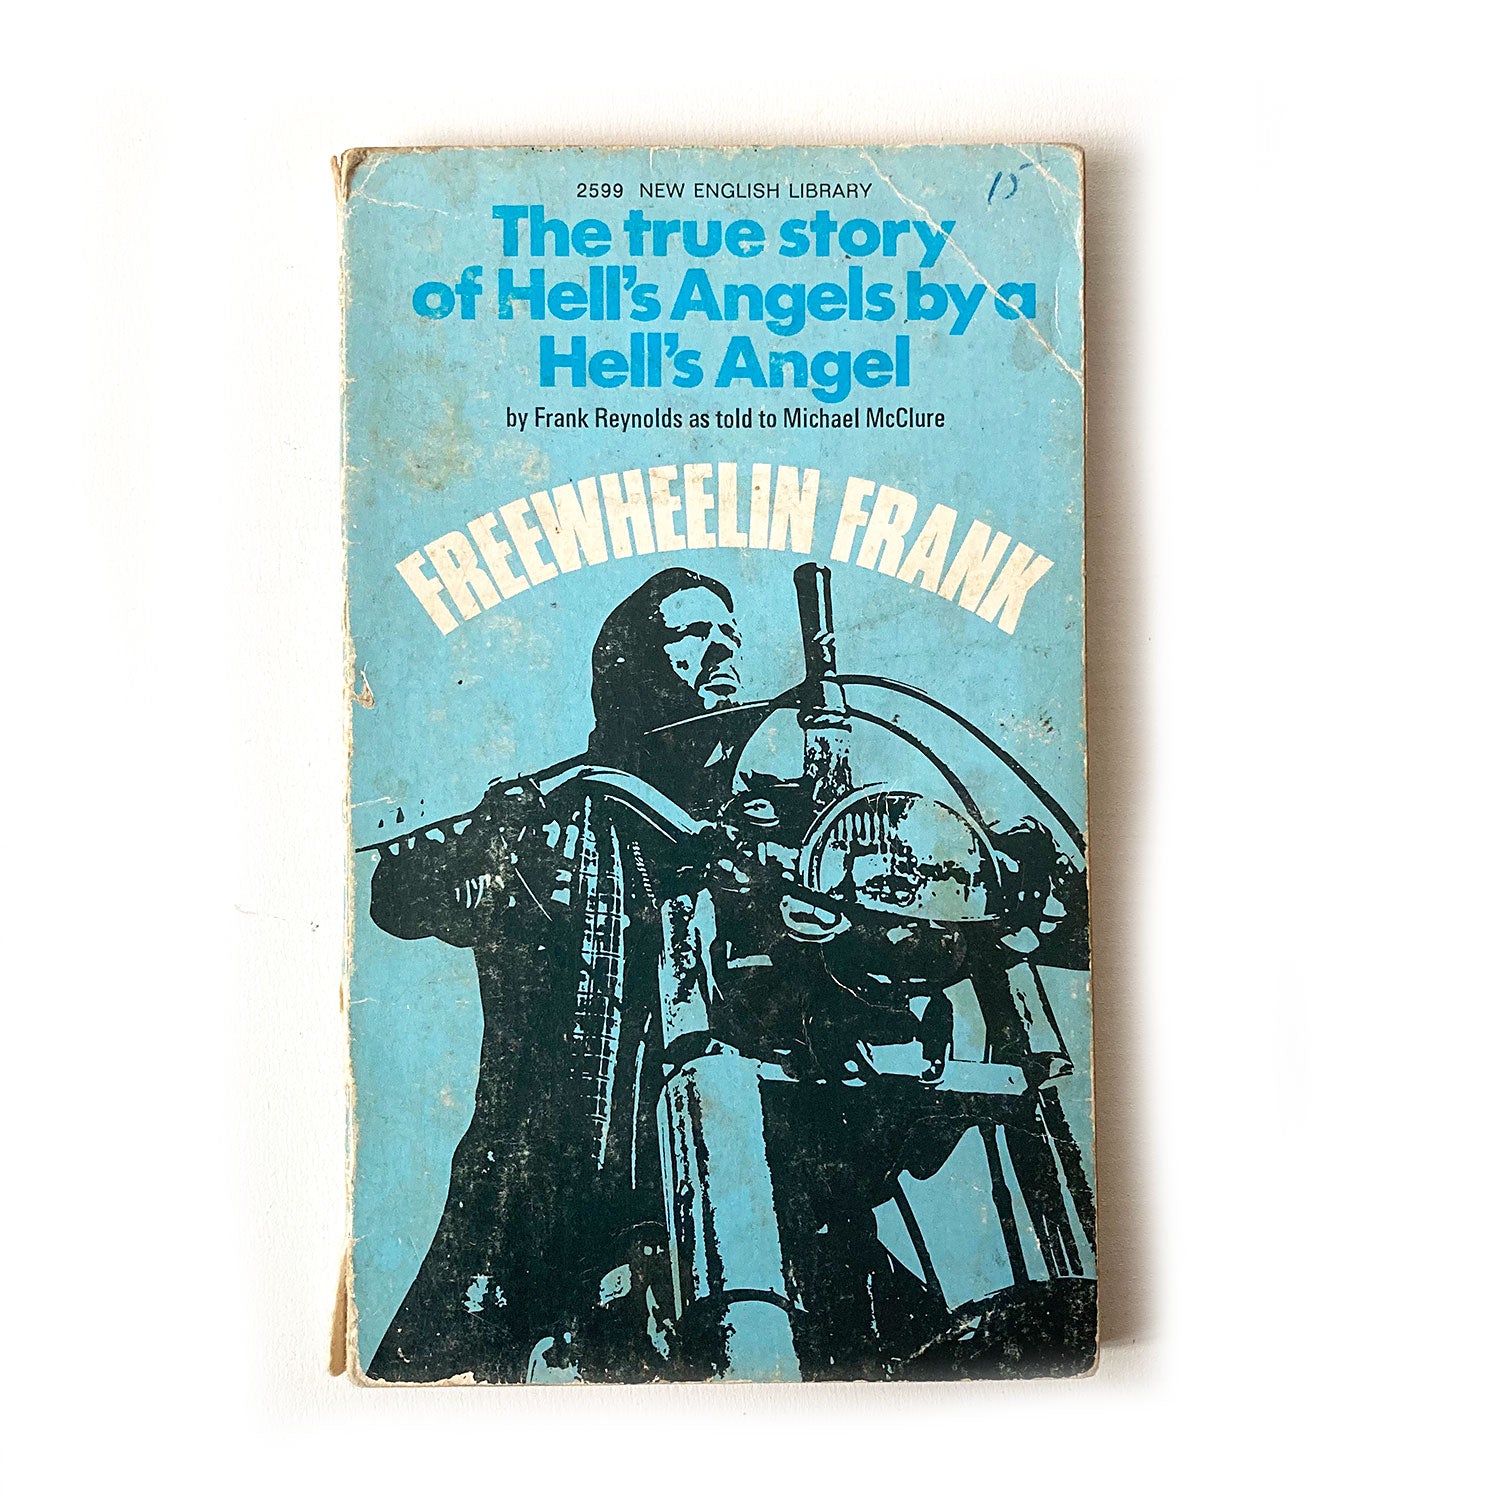 Freewheelin Frank, The true story of Hell's Angels by a Hell's Angel, New English Library edition, 1971